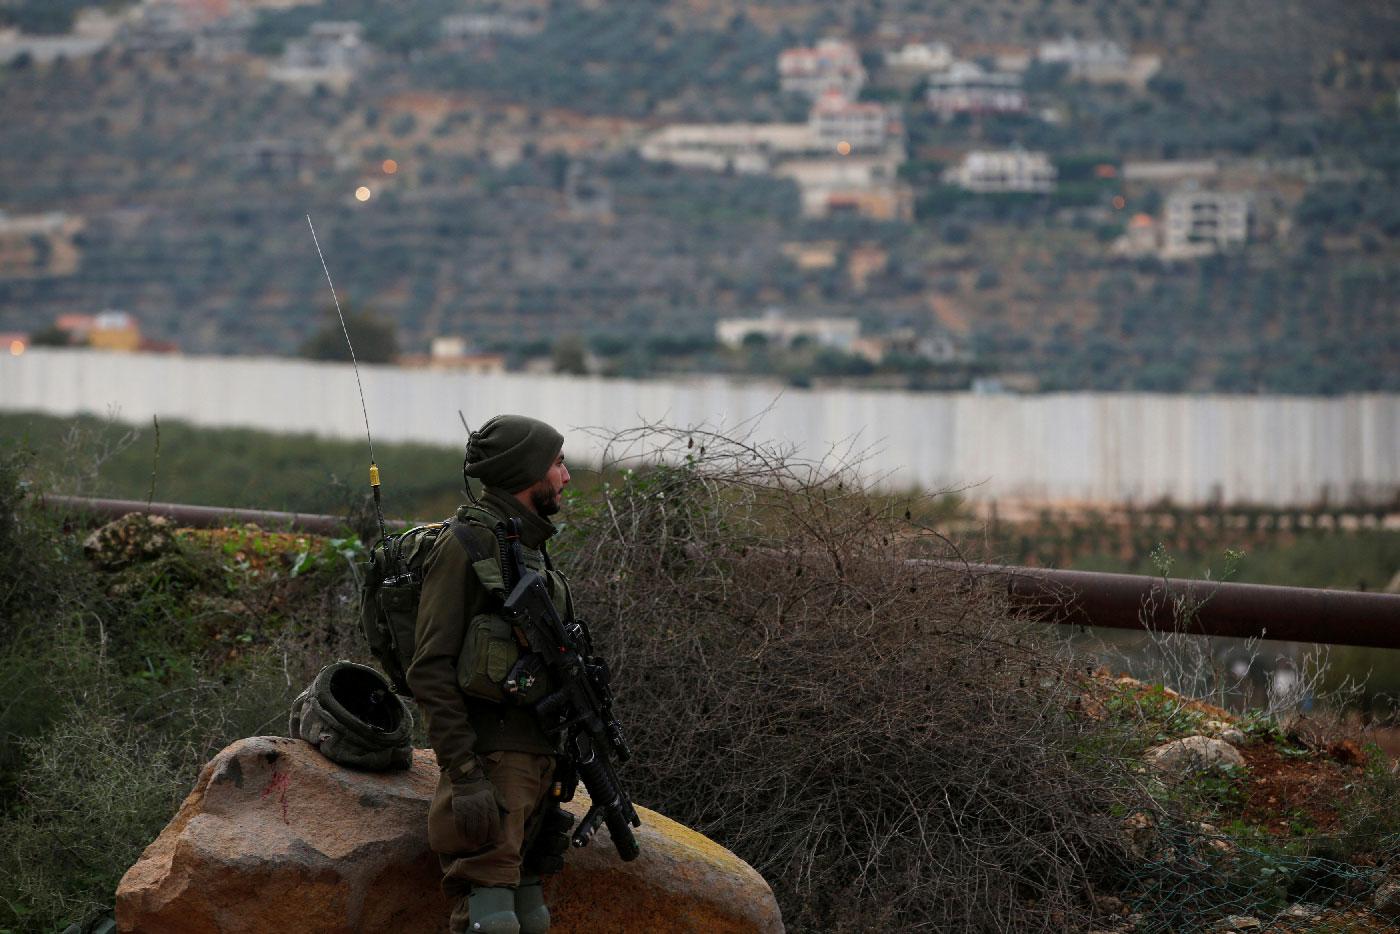 An Israeli soldier guards near the border with Lebanon on December 5, 2018.